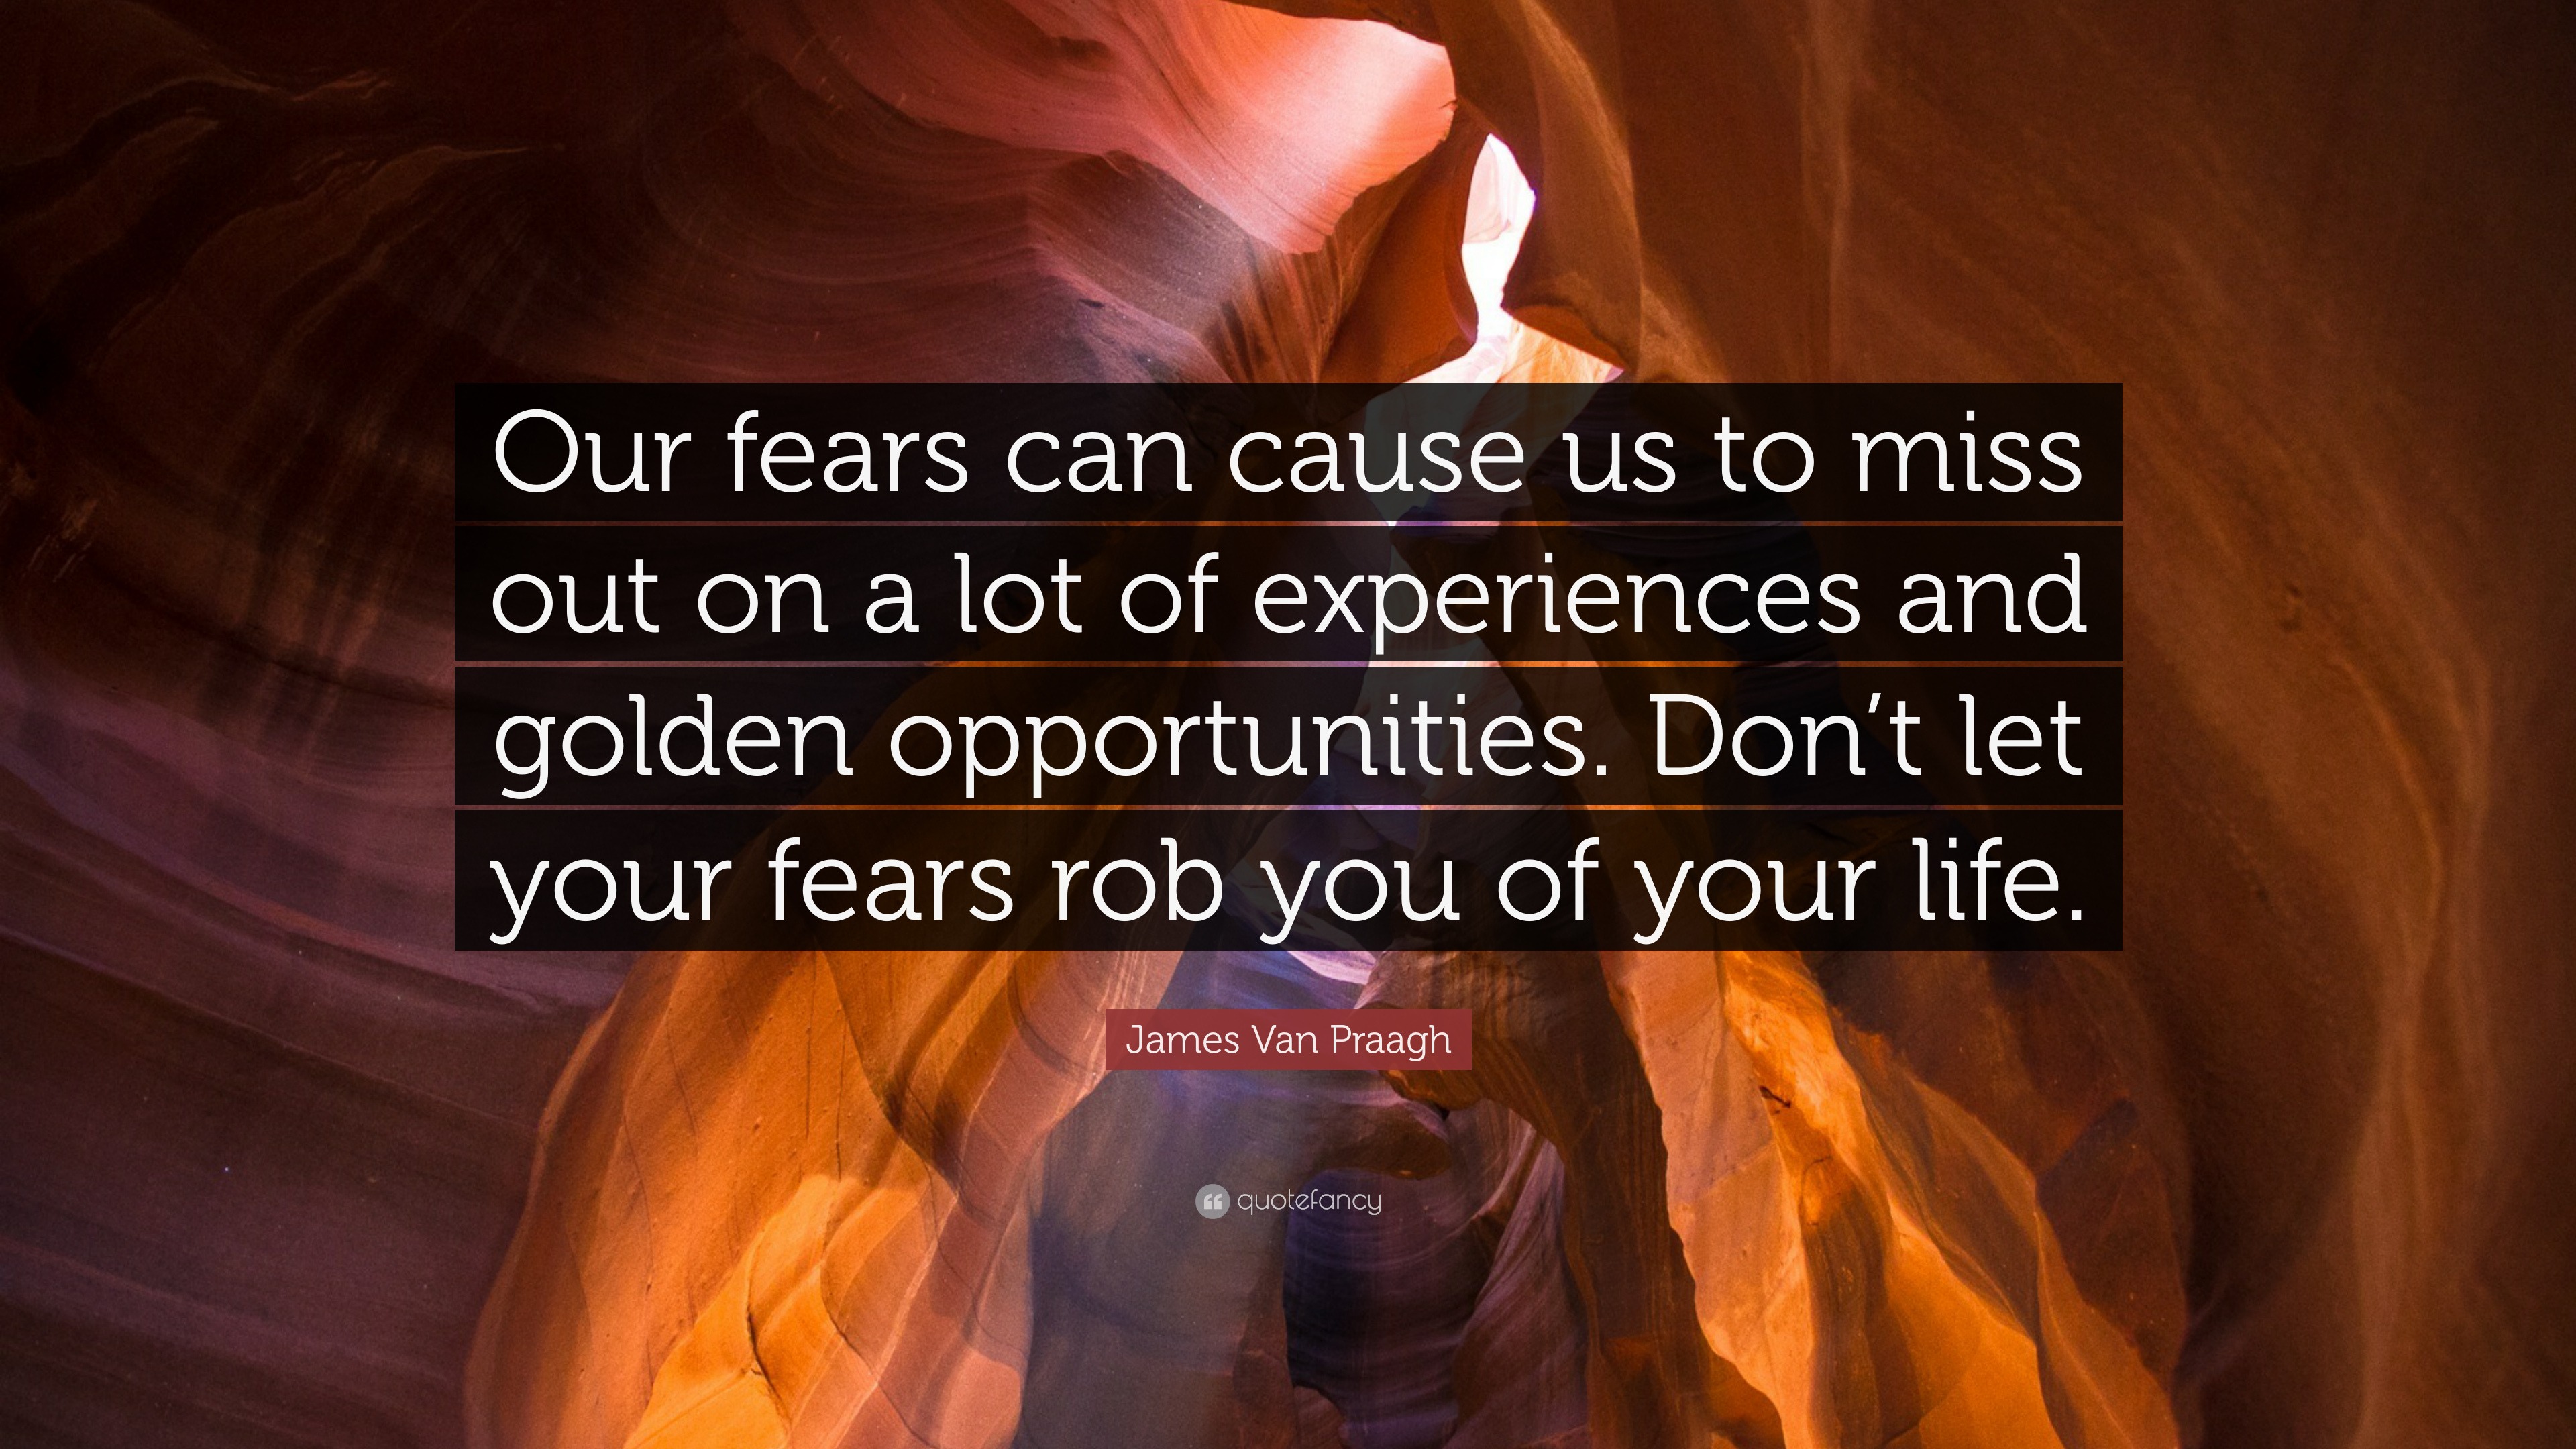 James Van Praagh Quote Our Fears Can Cause Us To Miss Out On A Lot Of Experiences And Golden Opportunities Don T Let Your Fears Rob You Of You